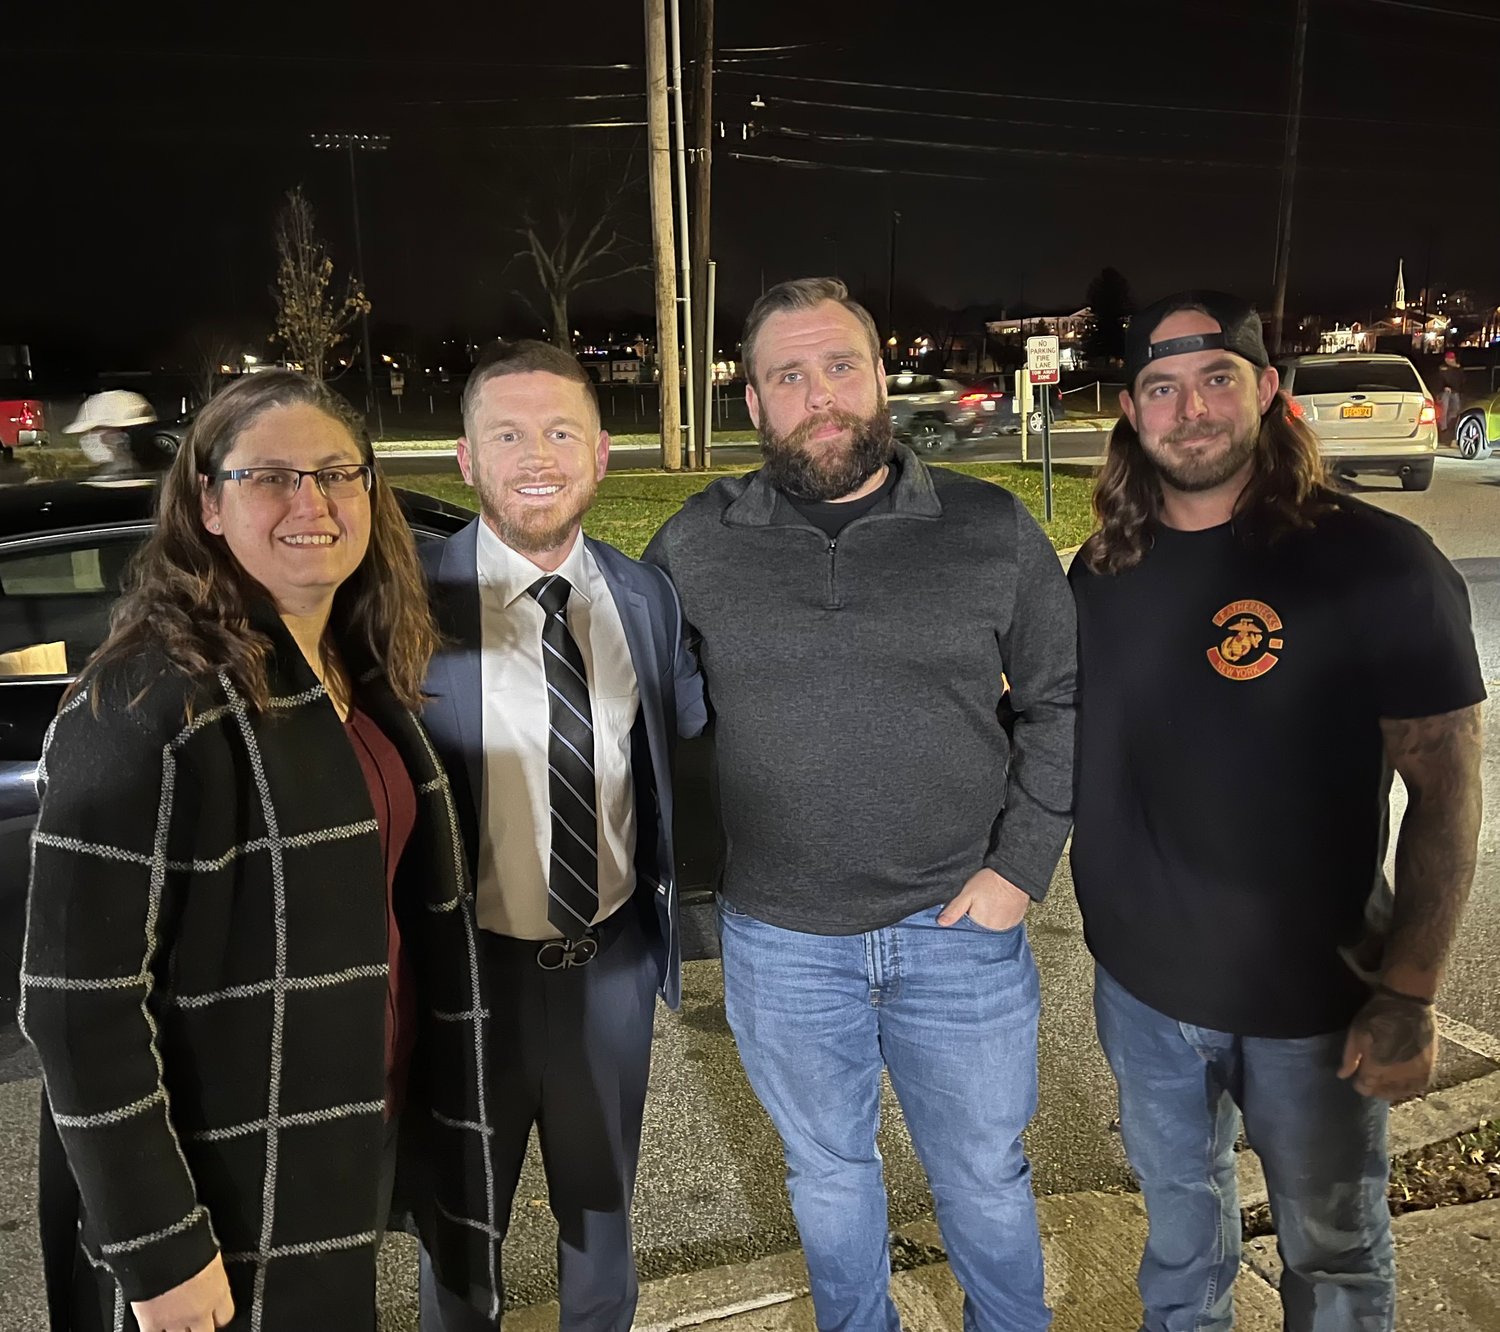 ATI Veteran Advocate Crystal Brousseau, left, Medal of Honor recipient Kyle Carpenter, and ATI Veteran Advocates Ryan Fuller and Kevin Coates attended the Rumshock Veterans Foundation Dinner in Newburgh on December 8.